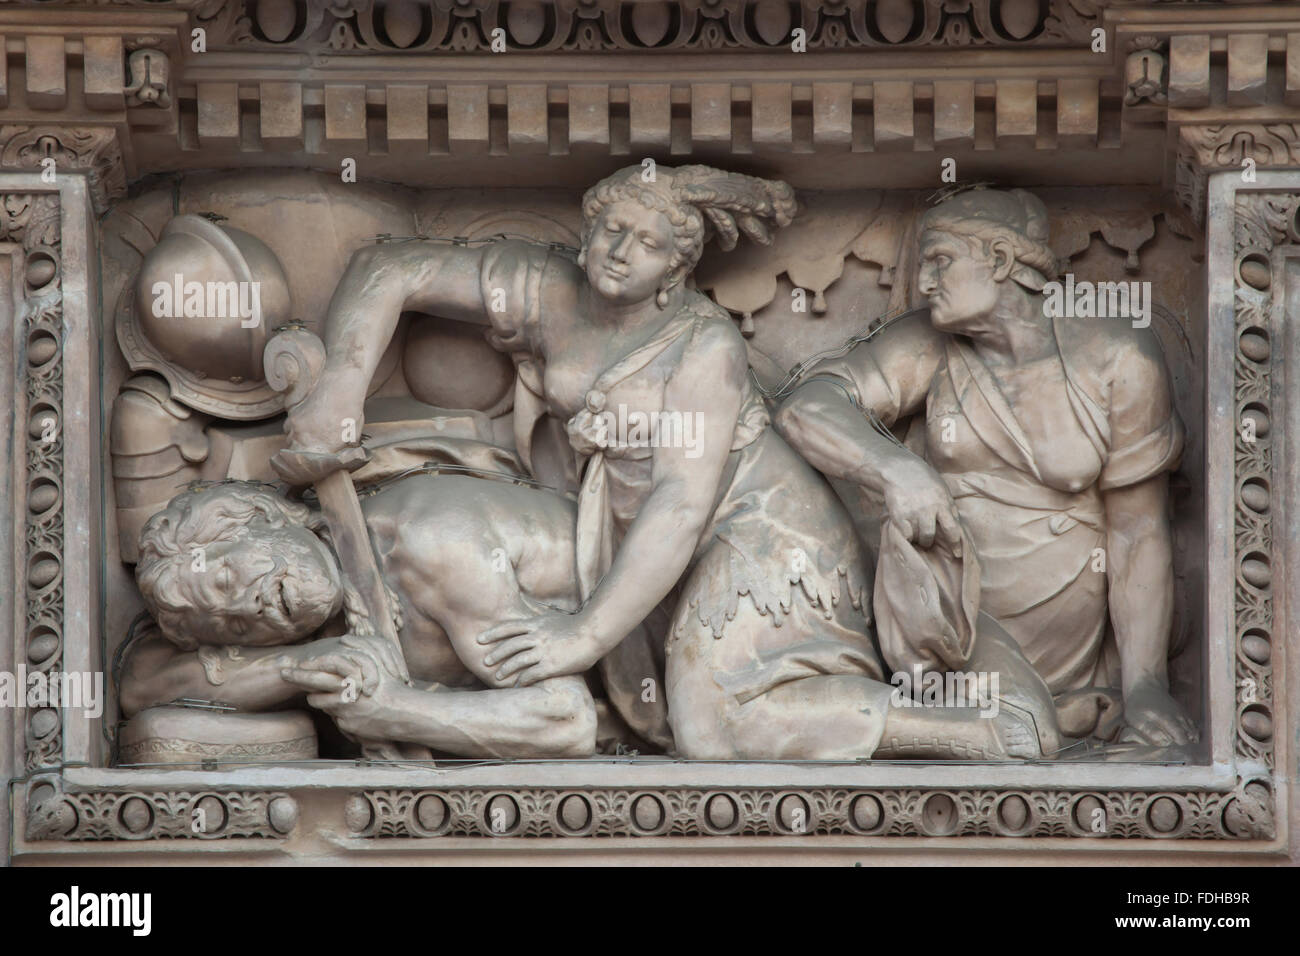 Judith beheading Holofernes. Marble relief on the main facade of the Milan Cathedral (Duomo di Milano) in Milan, Lombardy, Italy. Stock Photo